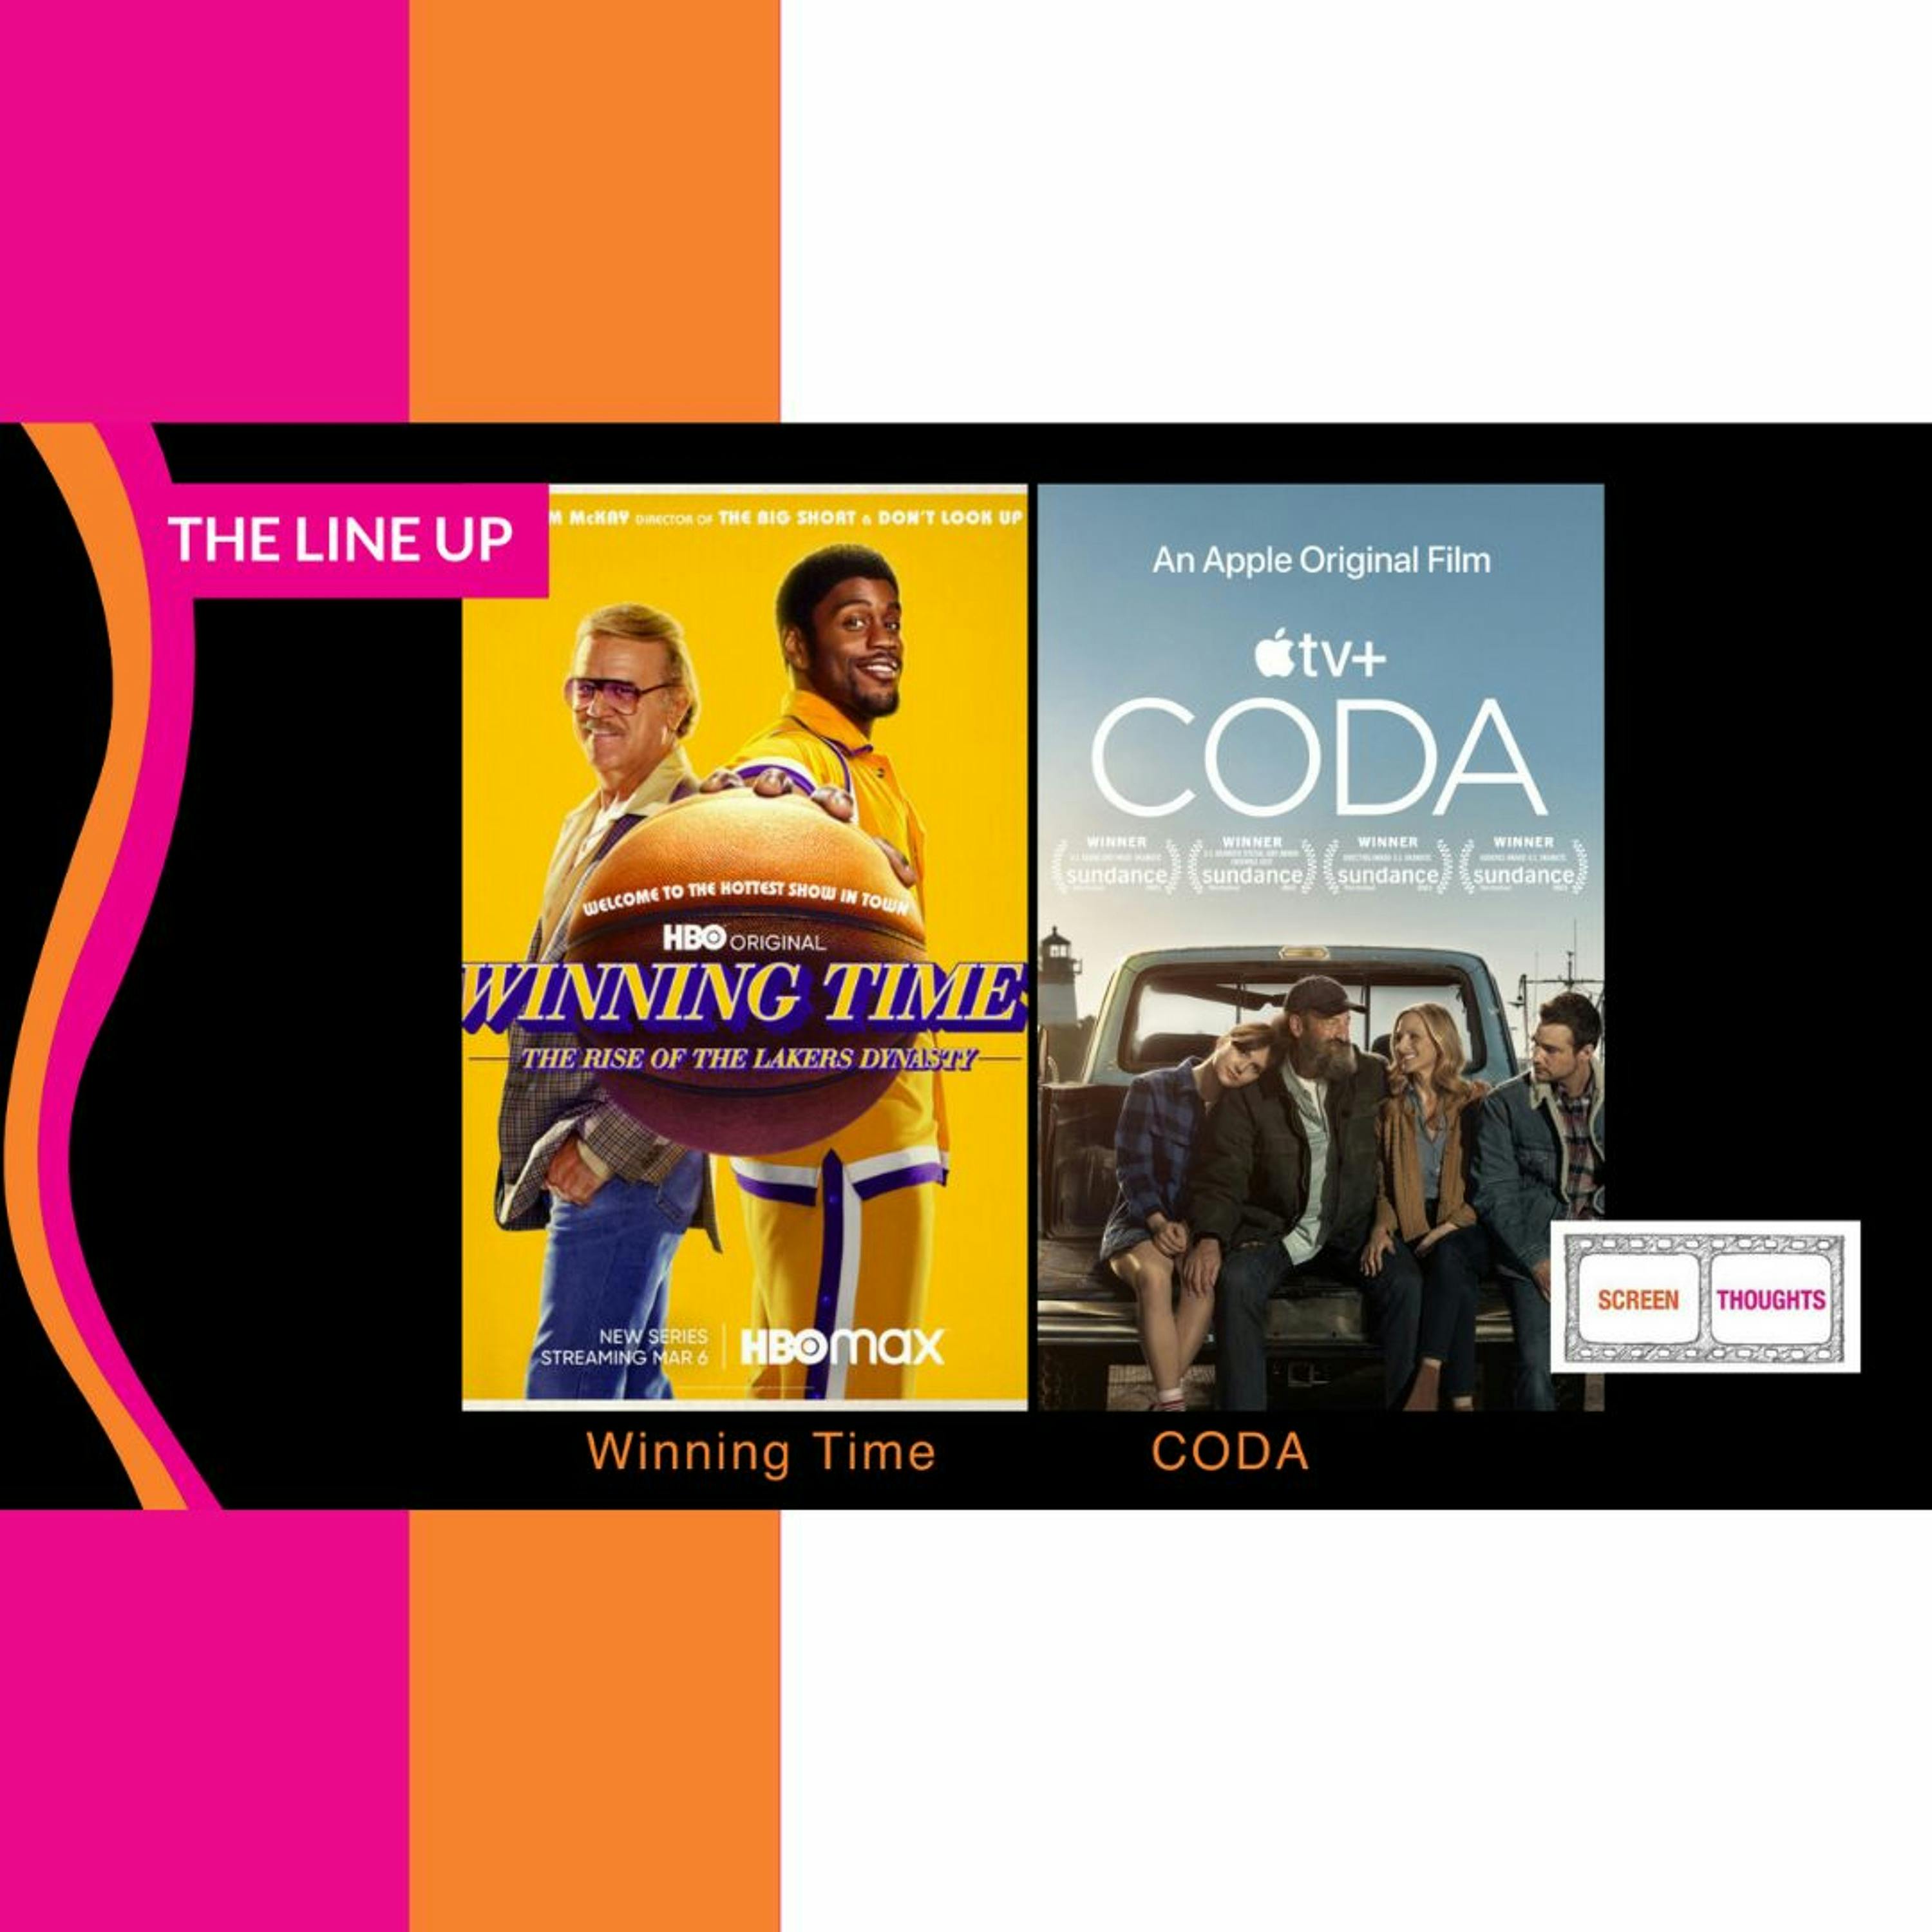 Film Review: Coda & HBO Series: Winning Time